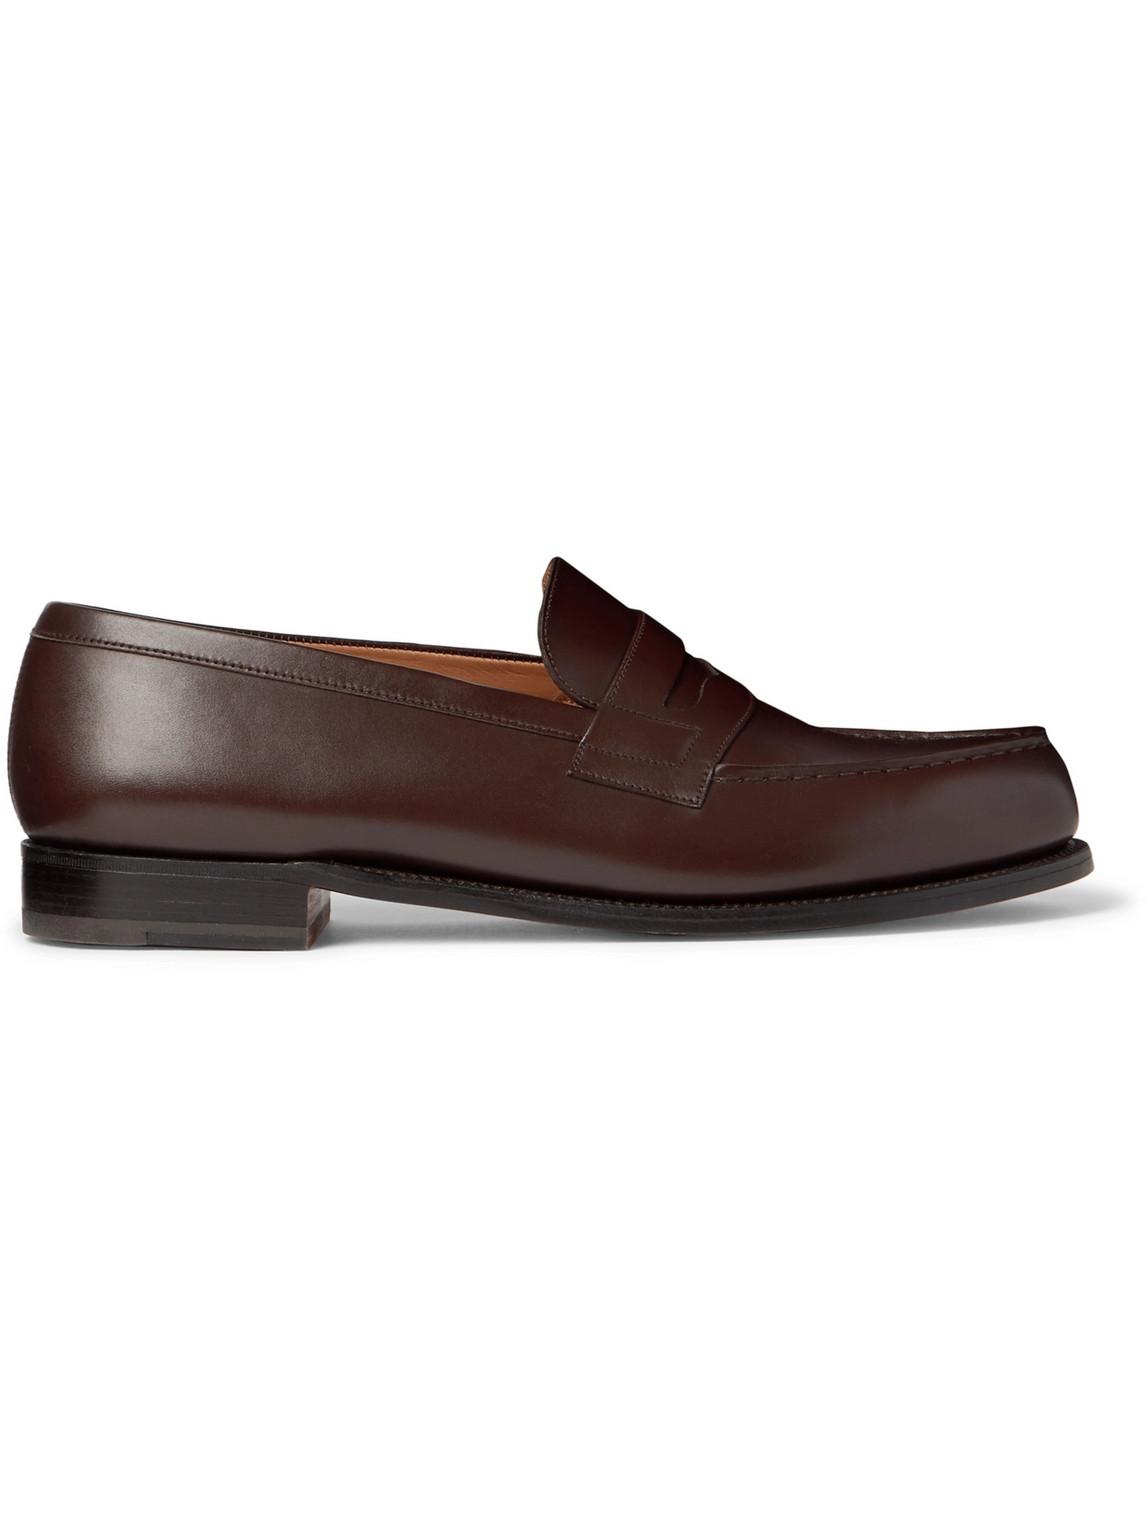 J.M. Weston 180 Moccasin Leather Loafers in Brown for Men - Lyst